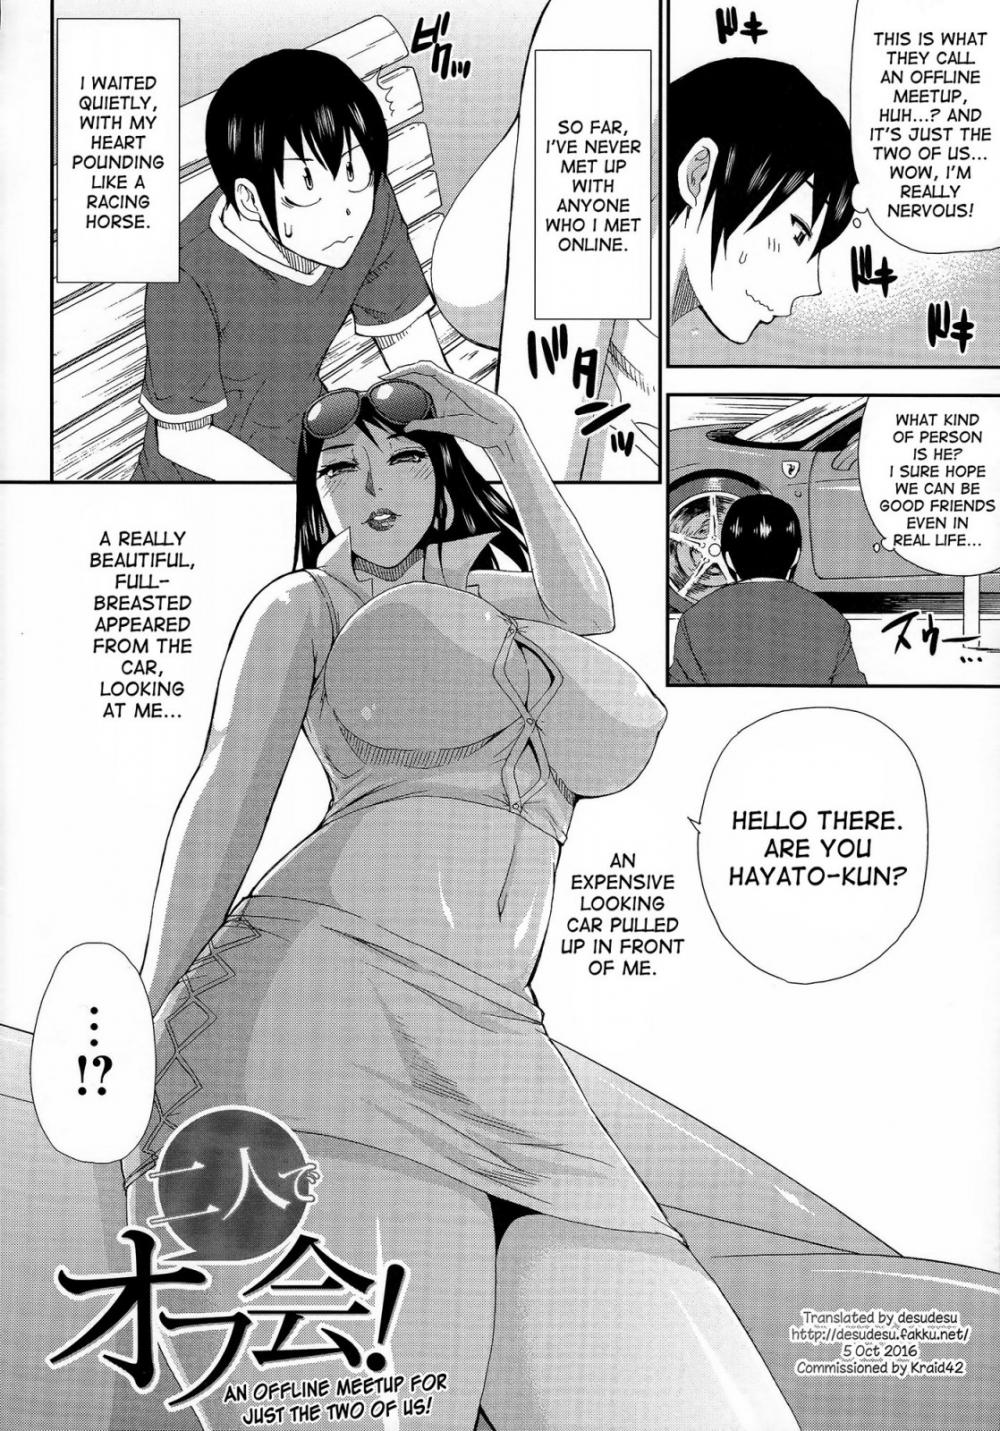 Hentai Manga Comic-An Offline Meetup For Just the Two of Us!-Read-2